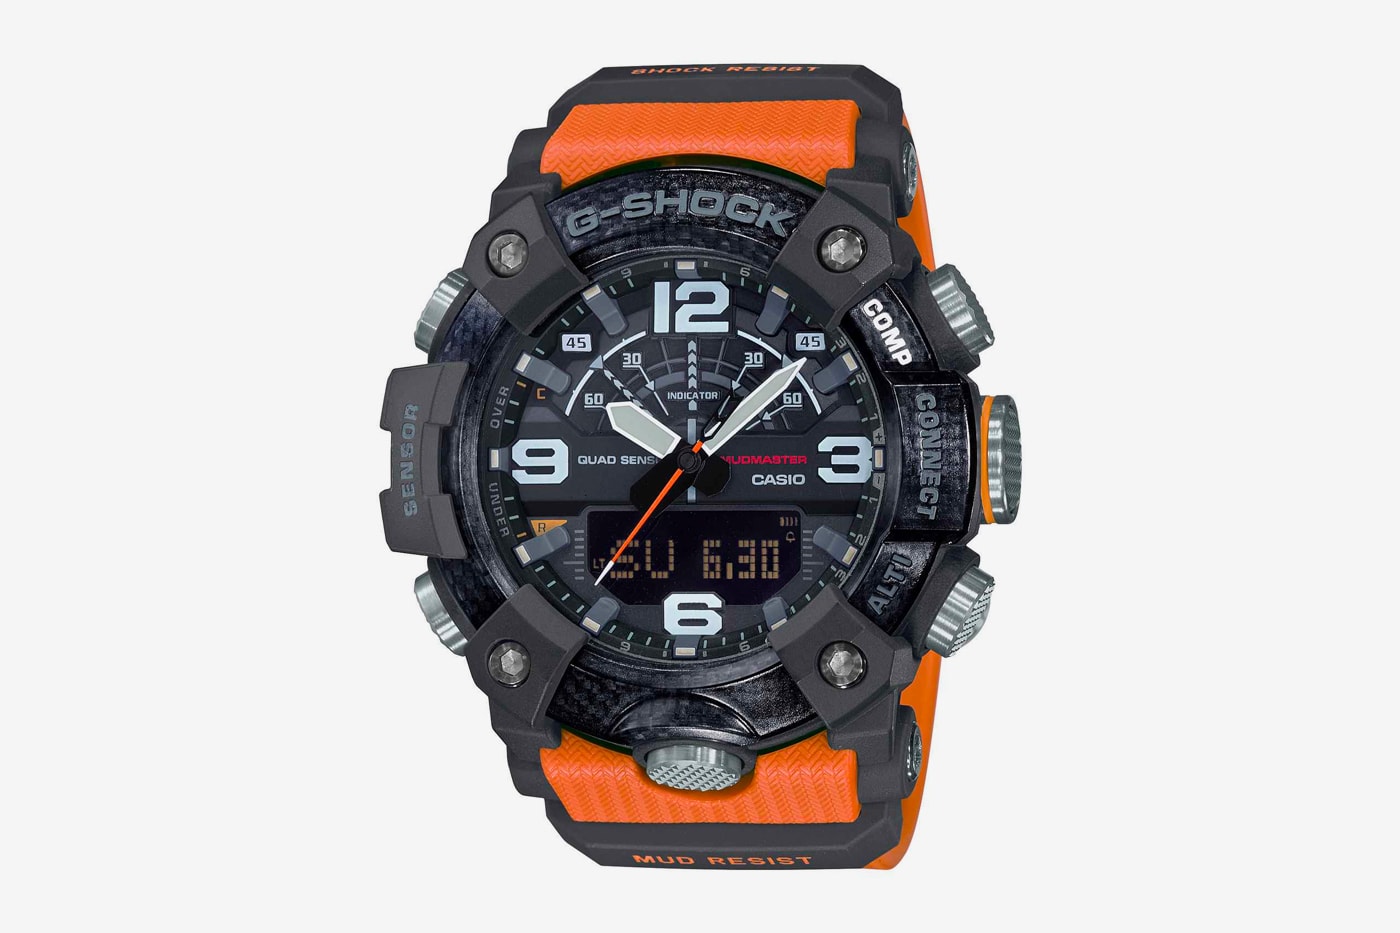 G SHOCK Mudmaster GG B100 Release Info carbon fiber core guard technology altimeter thermometer barometer accelerometer timepiece watches accessories casio